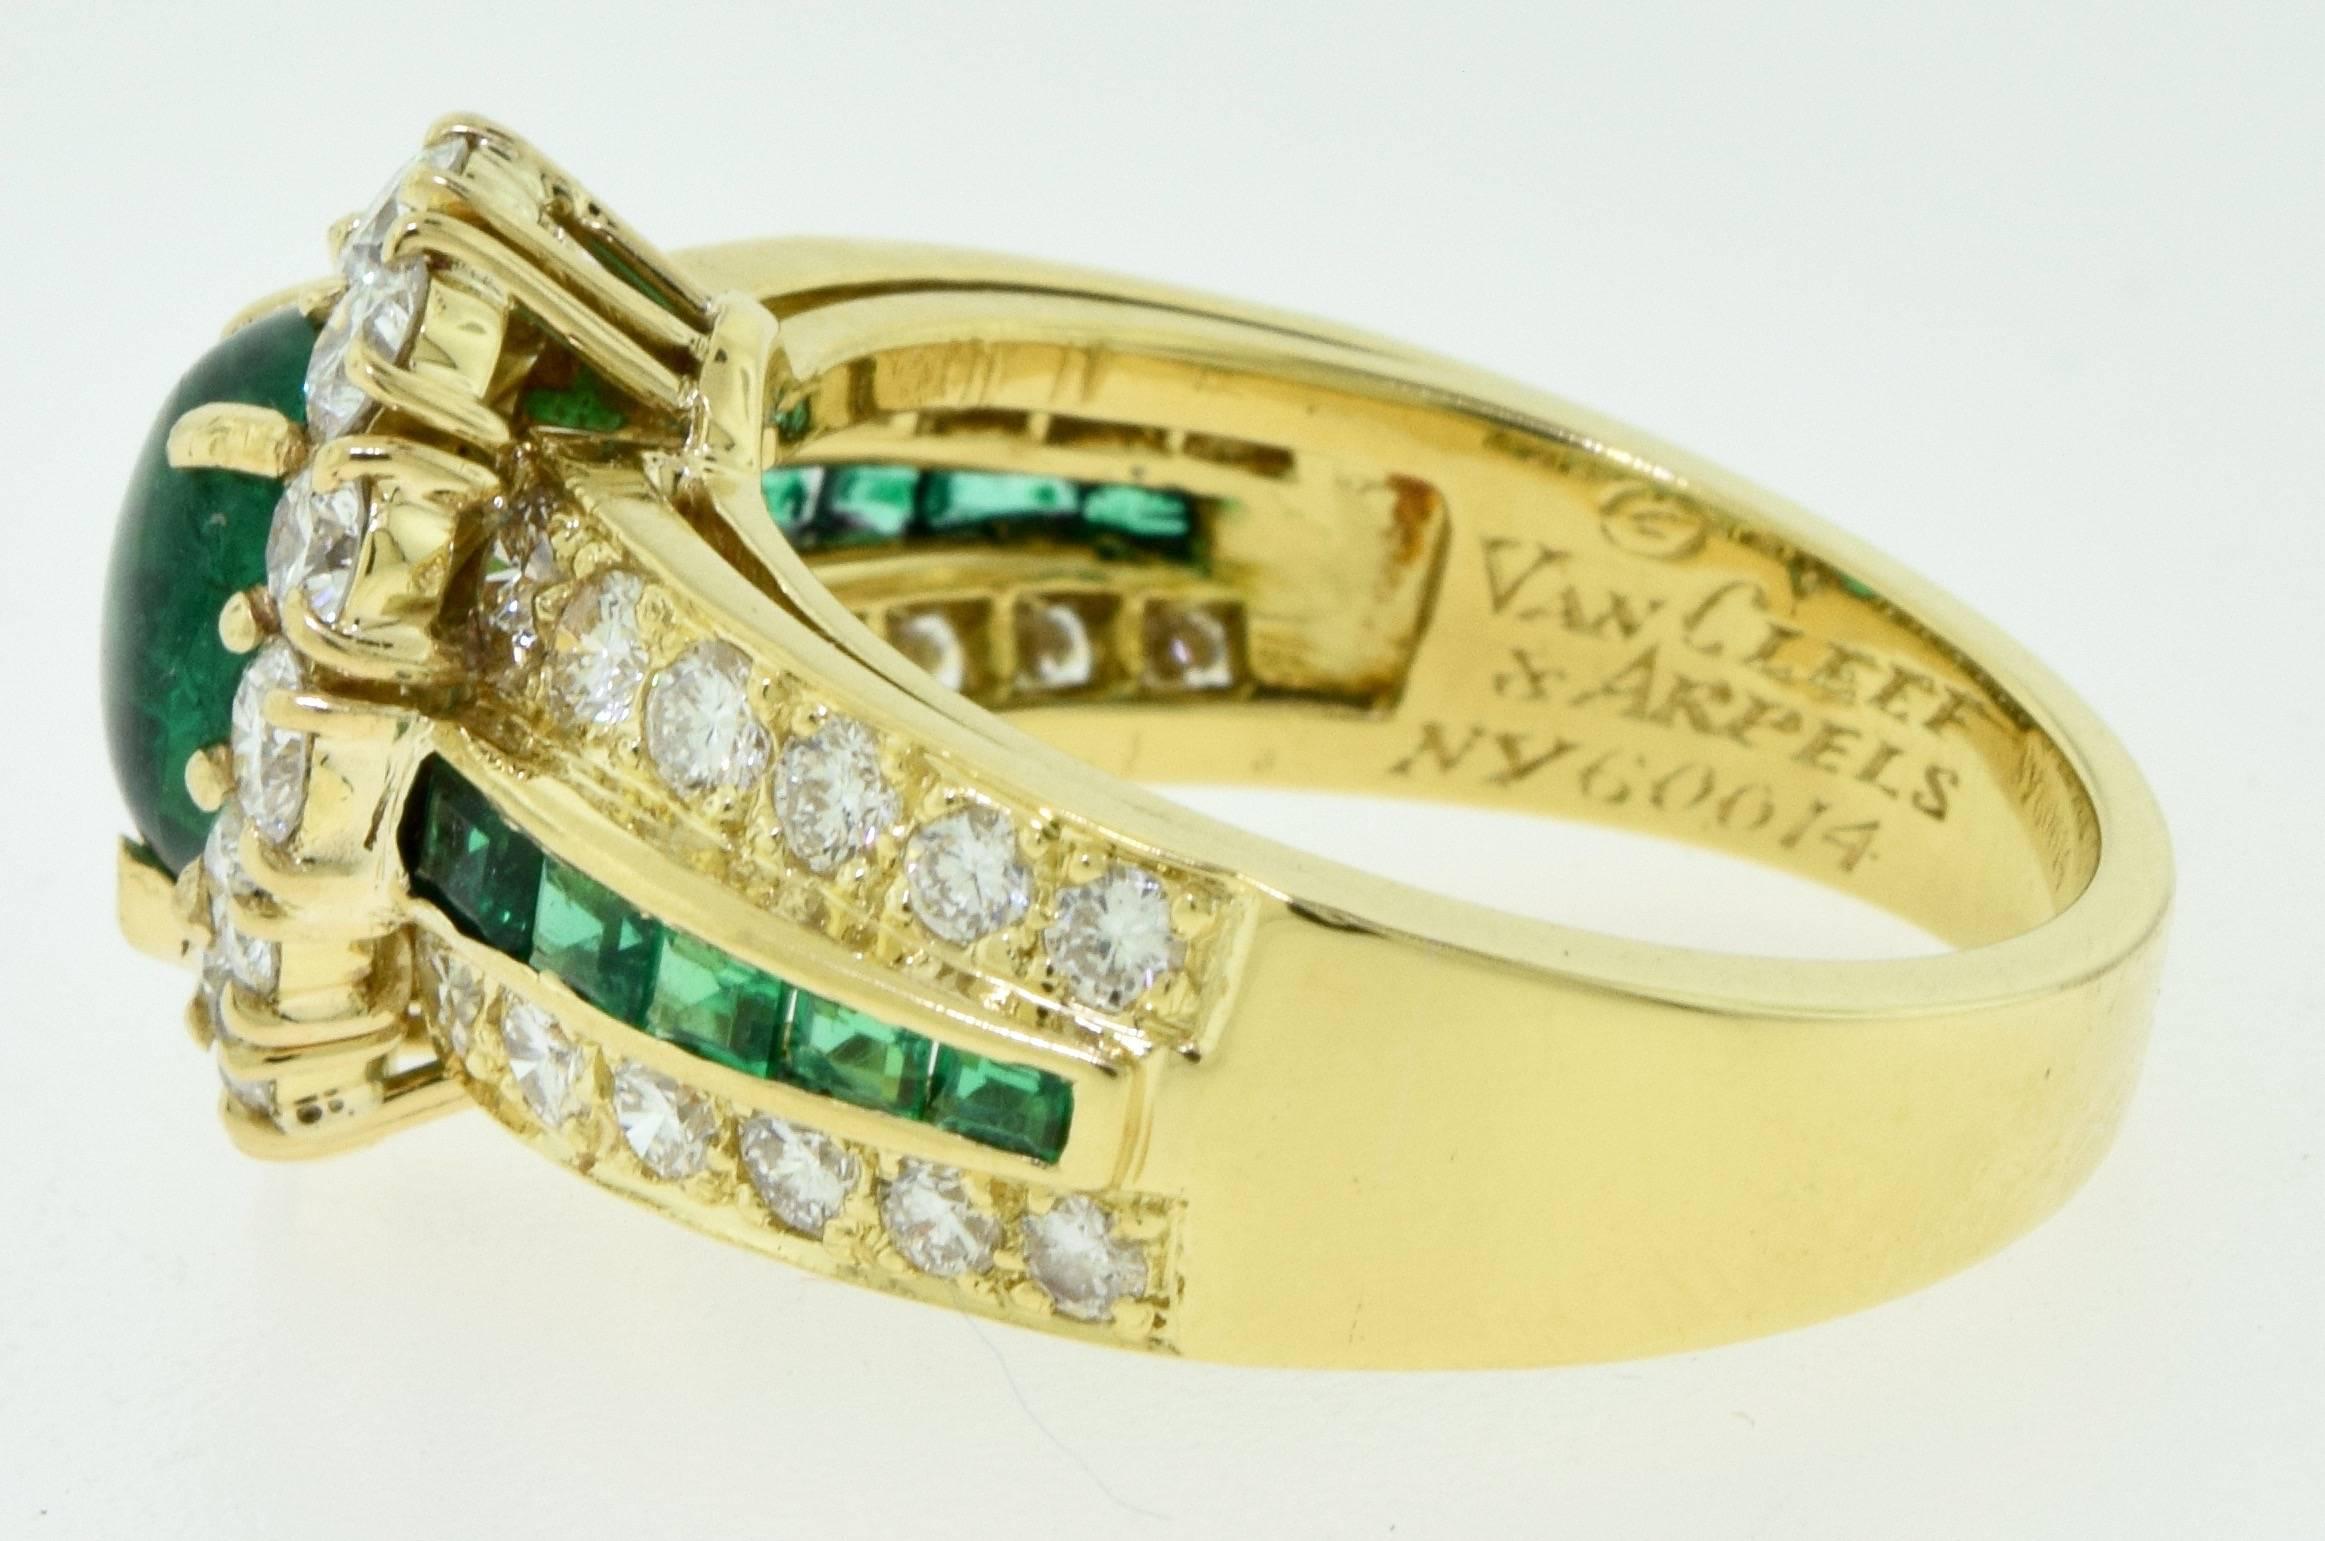 Van Cleef & Arpels Vintage Emerald and Diamond Ring In Excellent Condition For Sale In Miami, FL